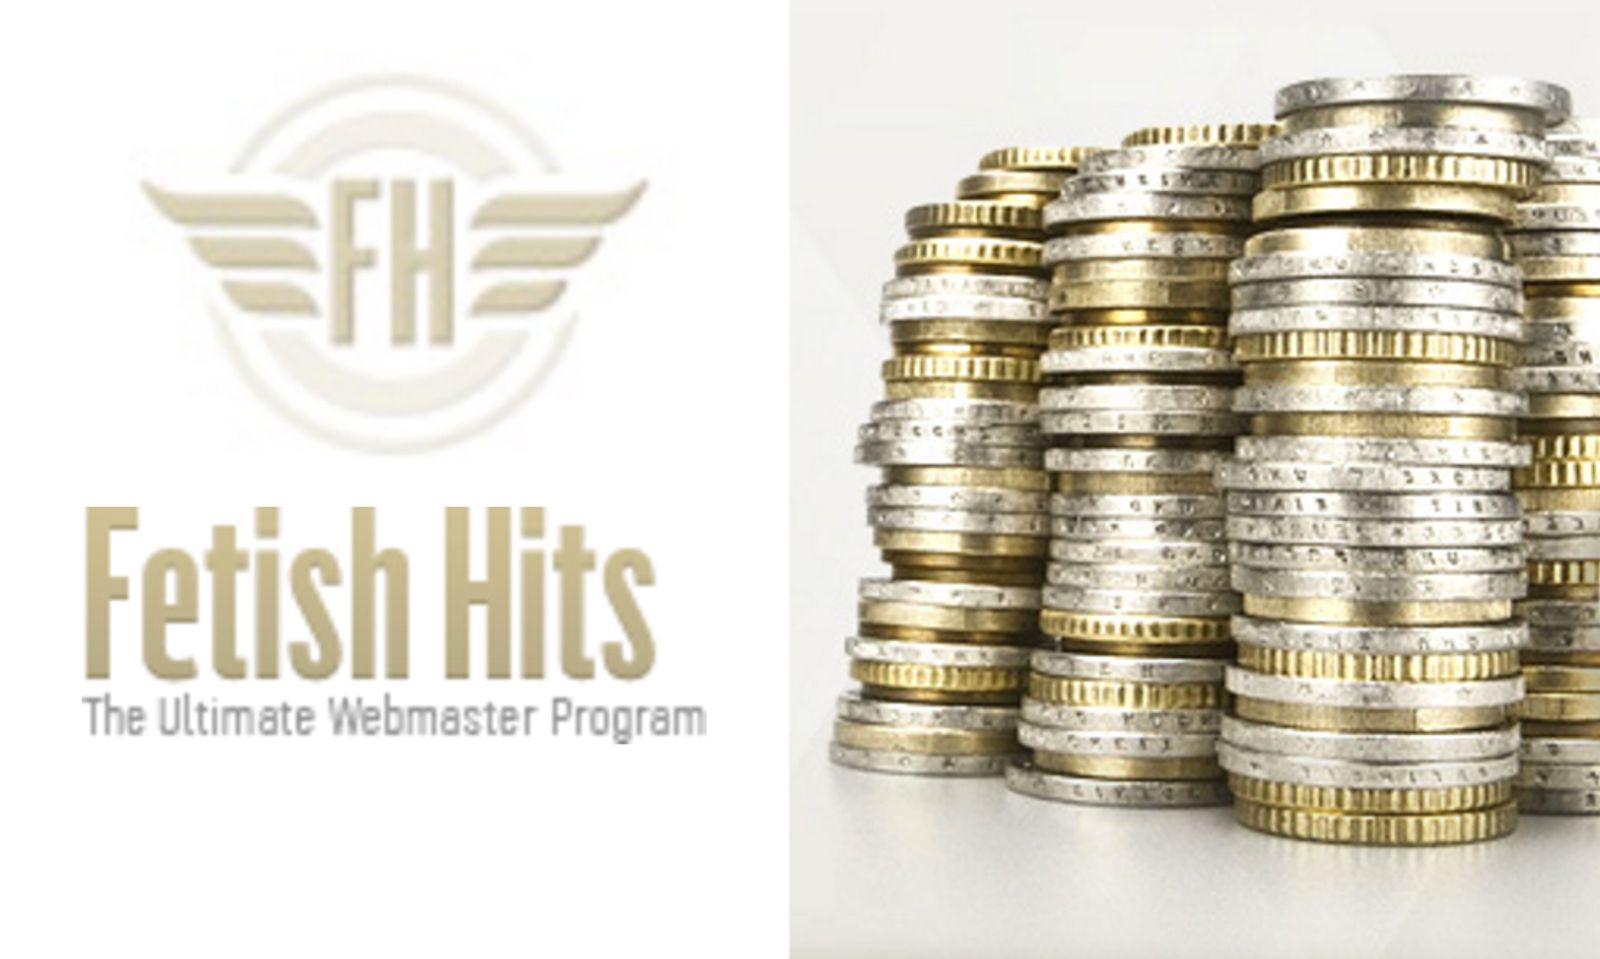 Fetish Hits Announces Upgrades to Its Network 